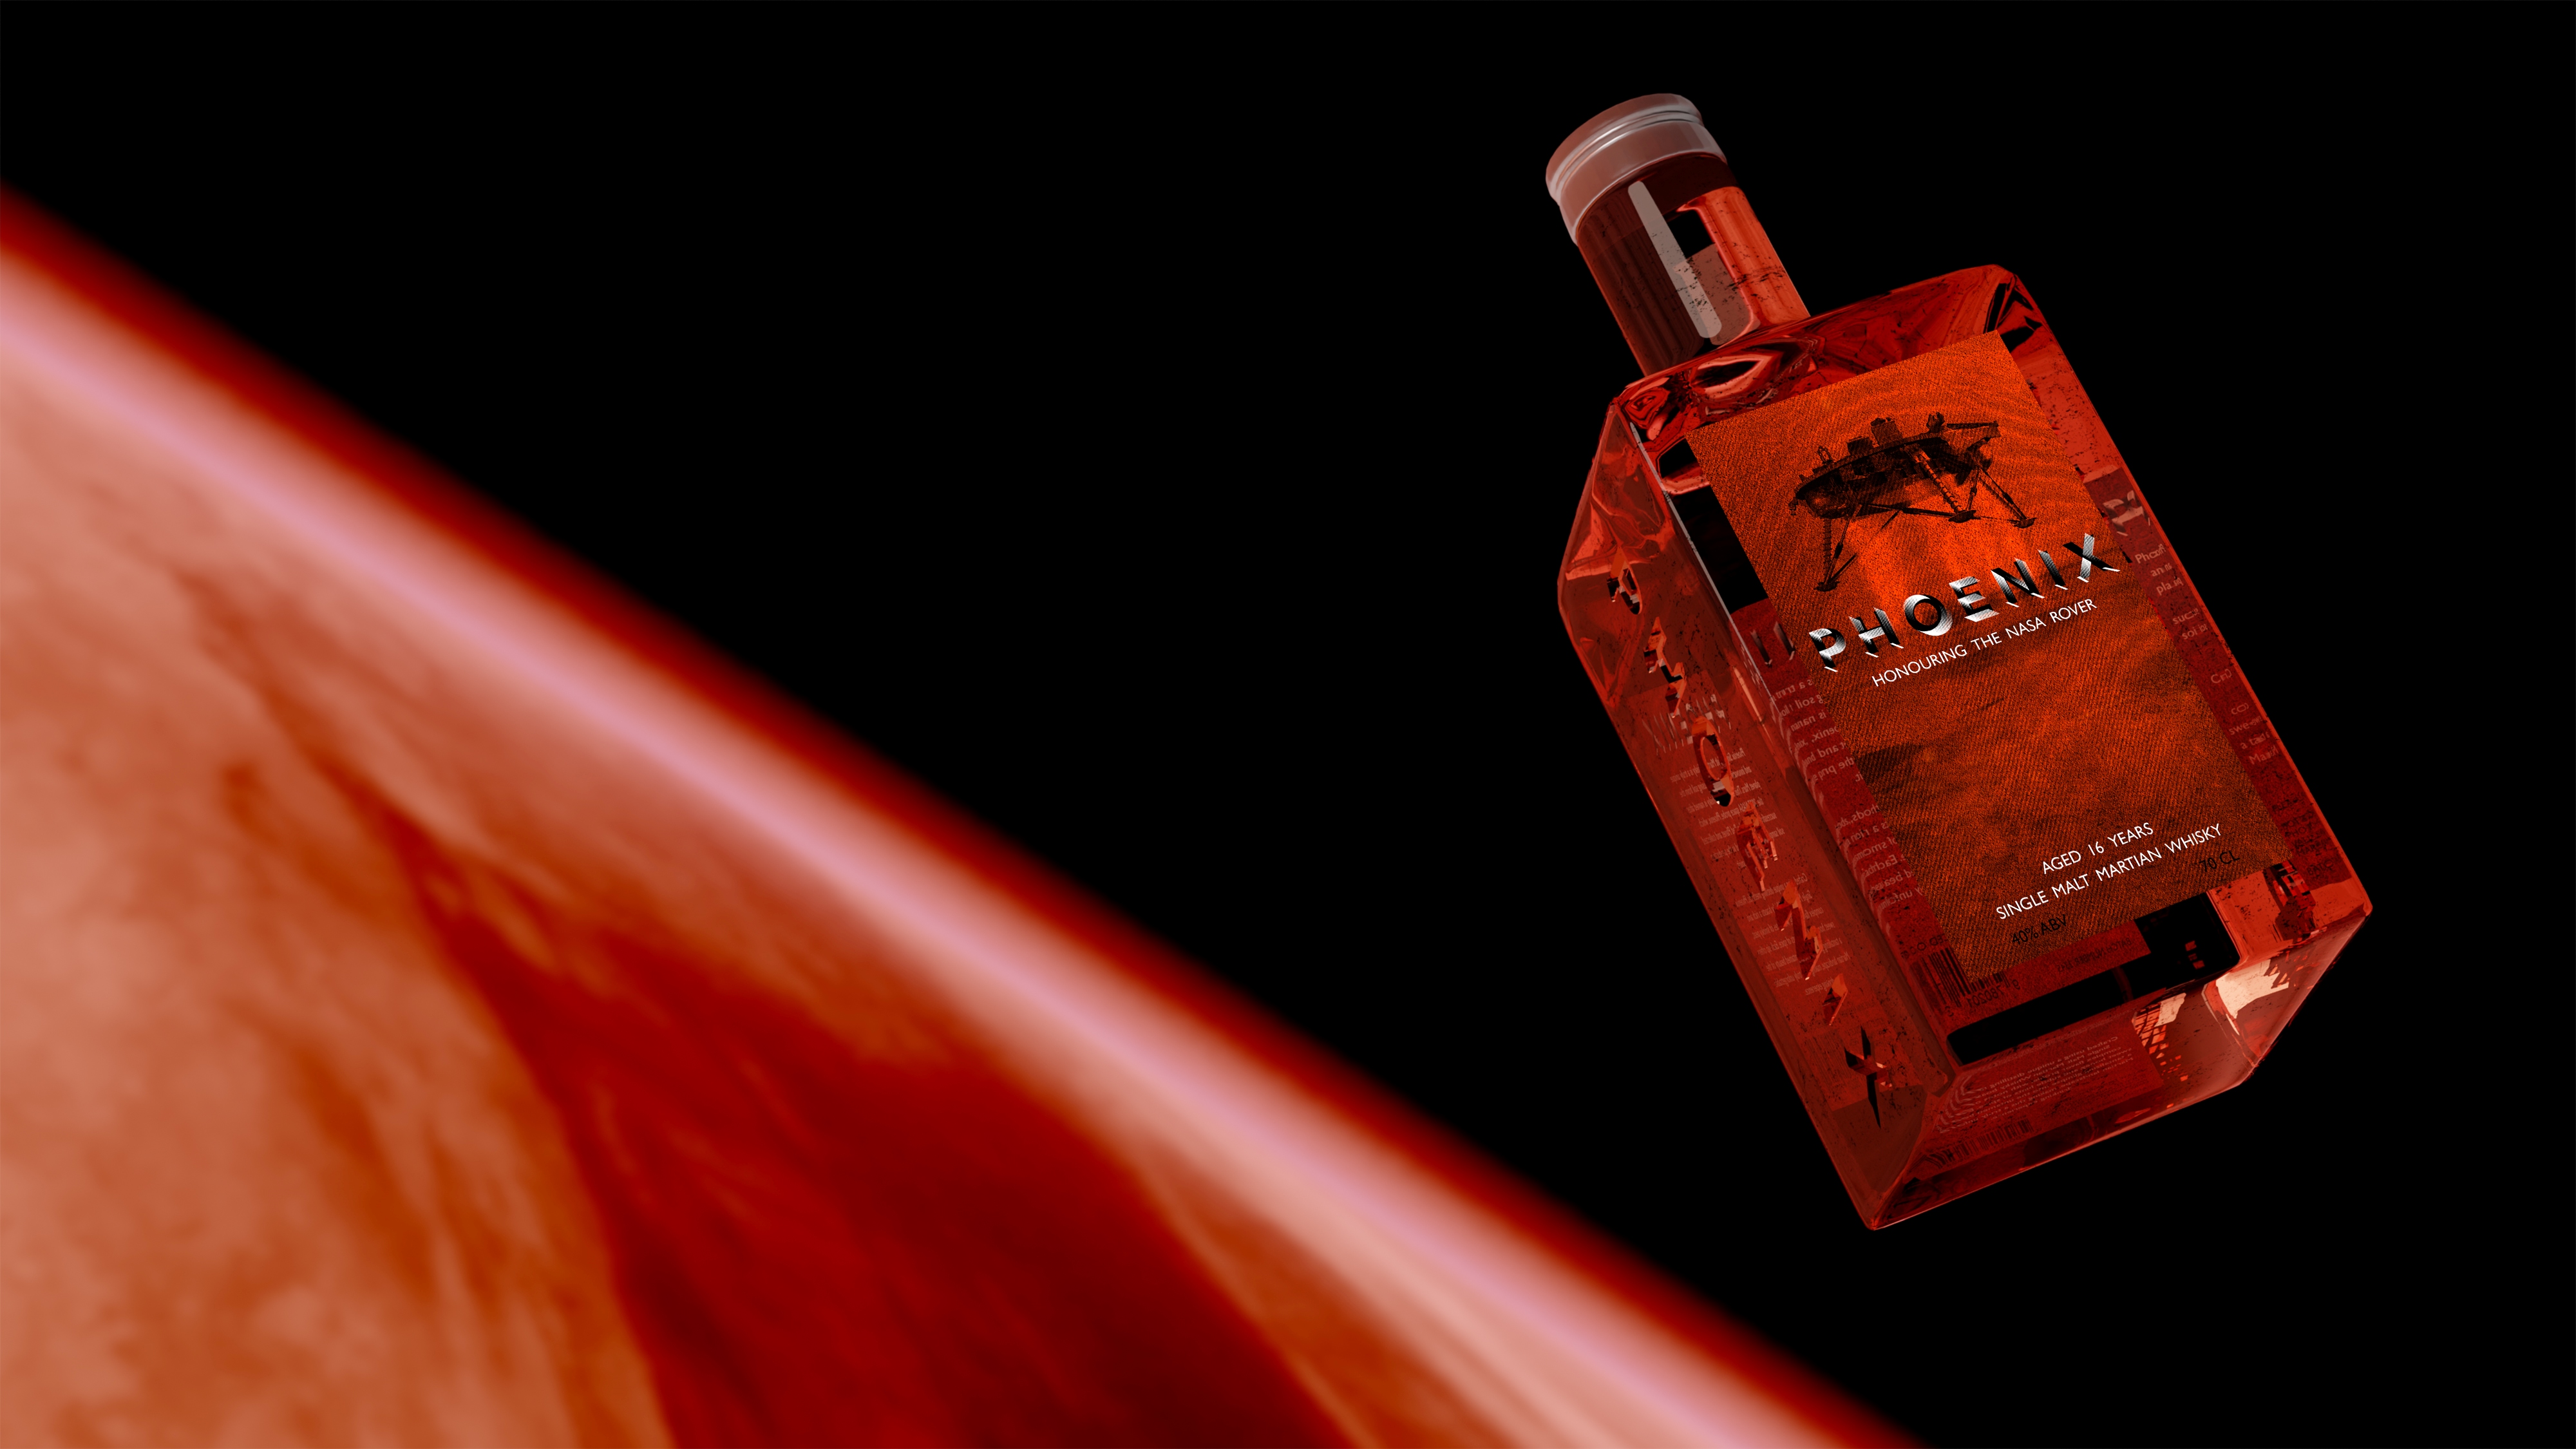 A red square bottle of Phoenix shown hovering above the Red Planet.